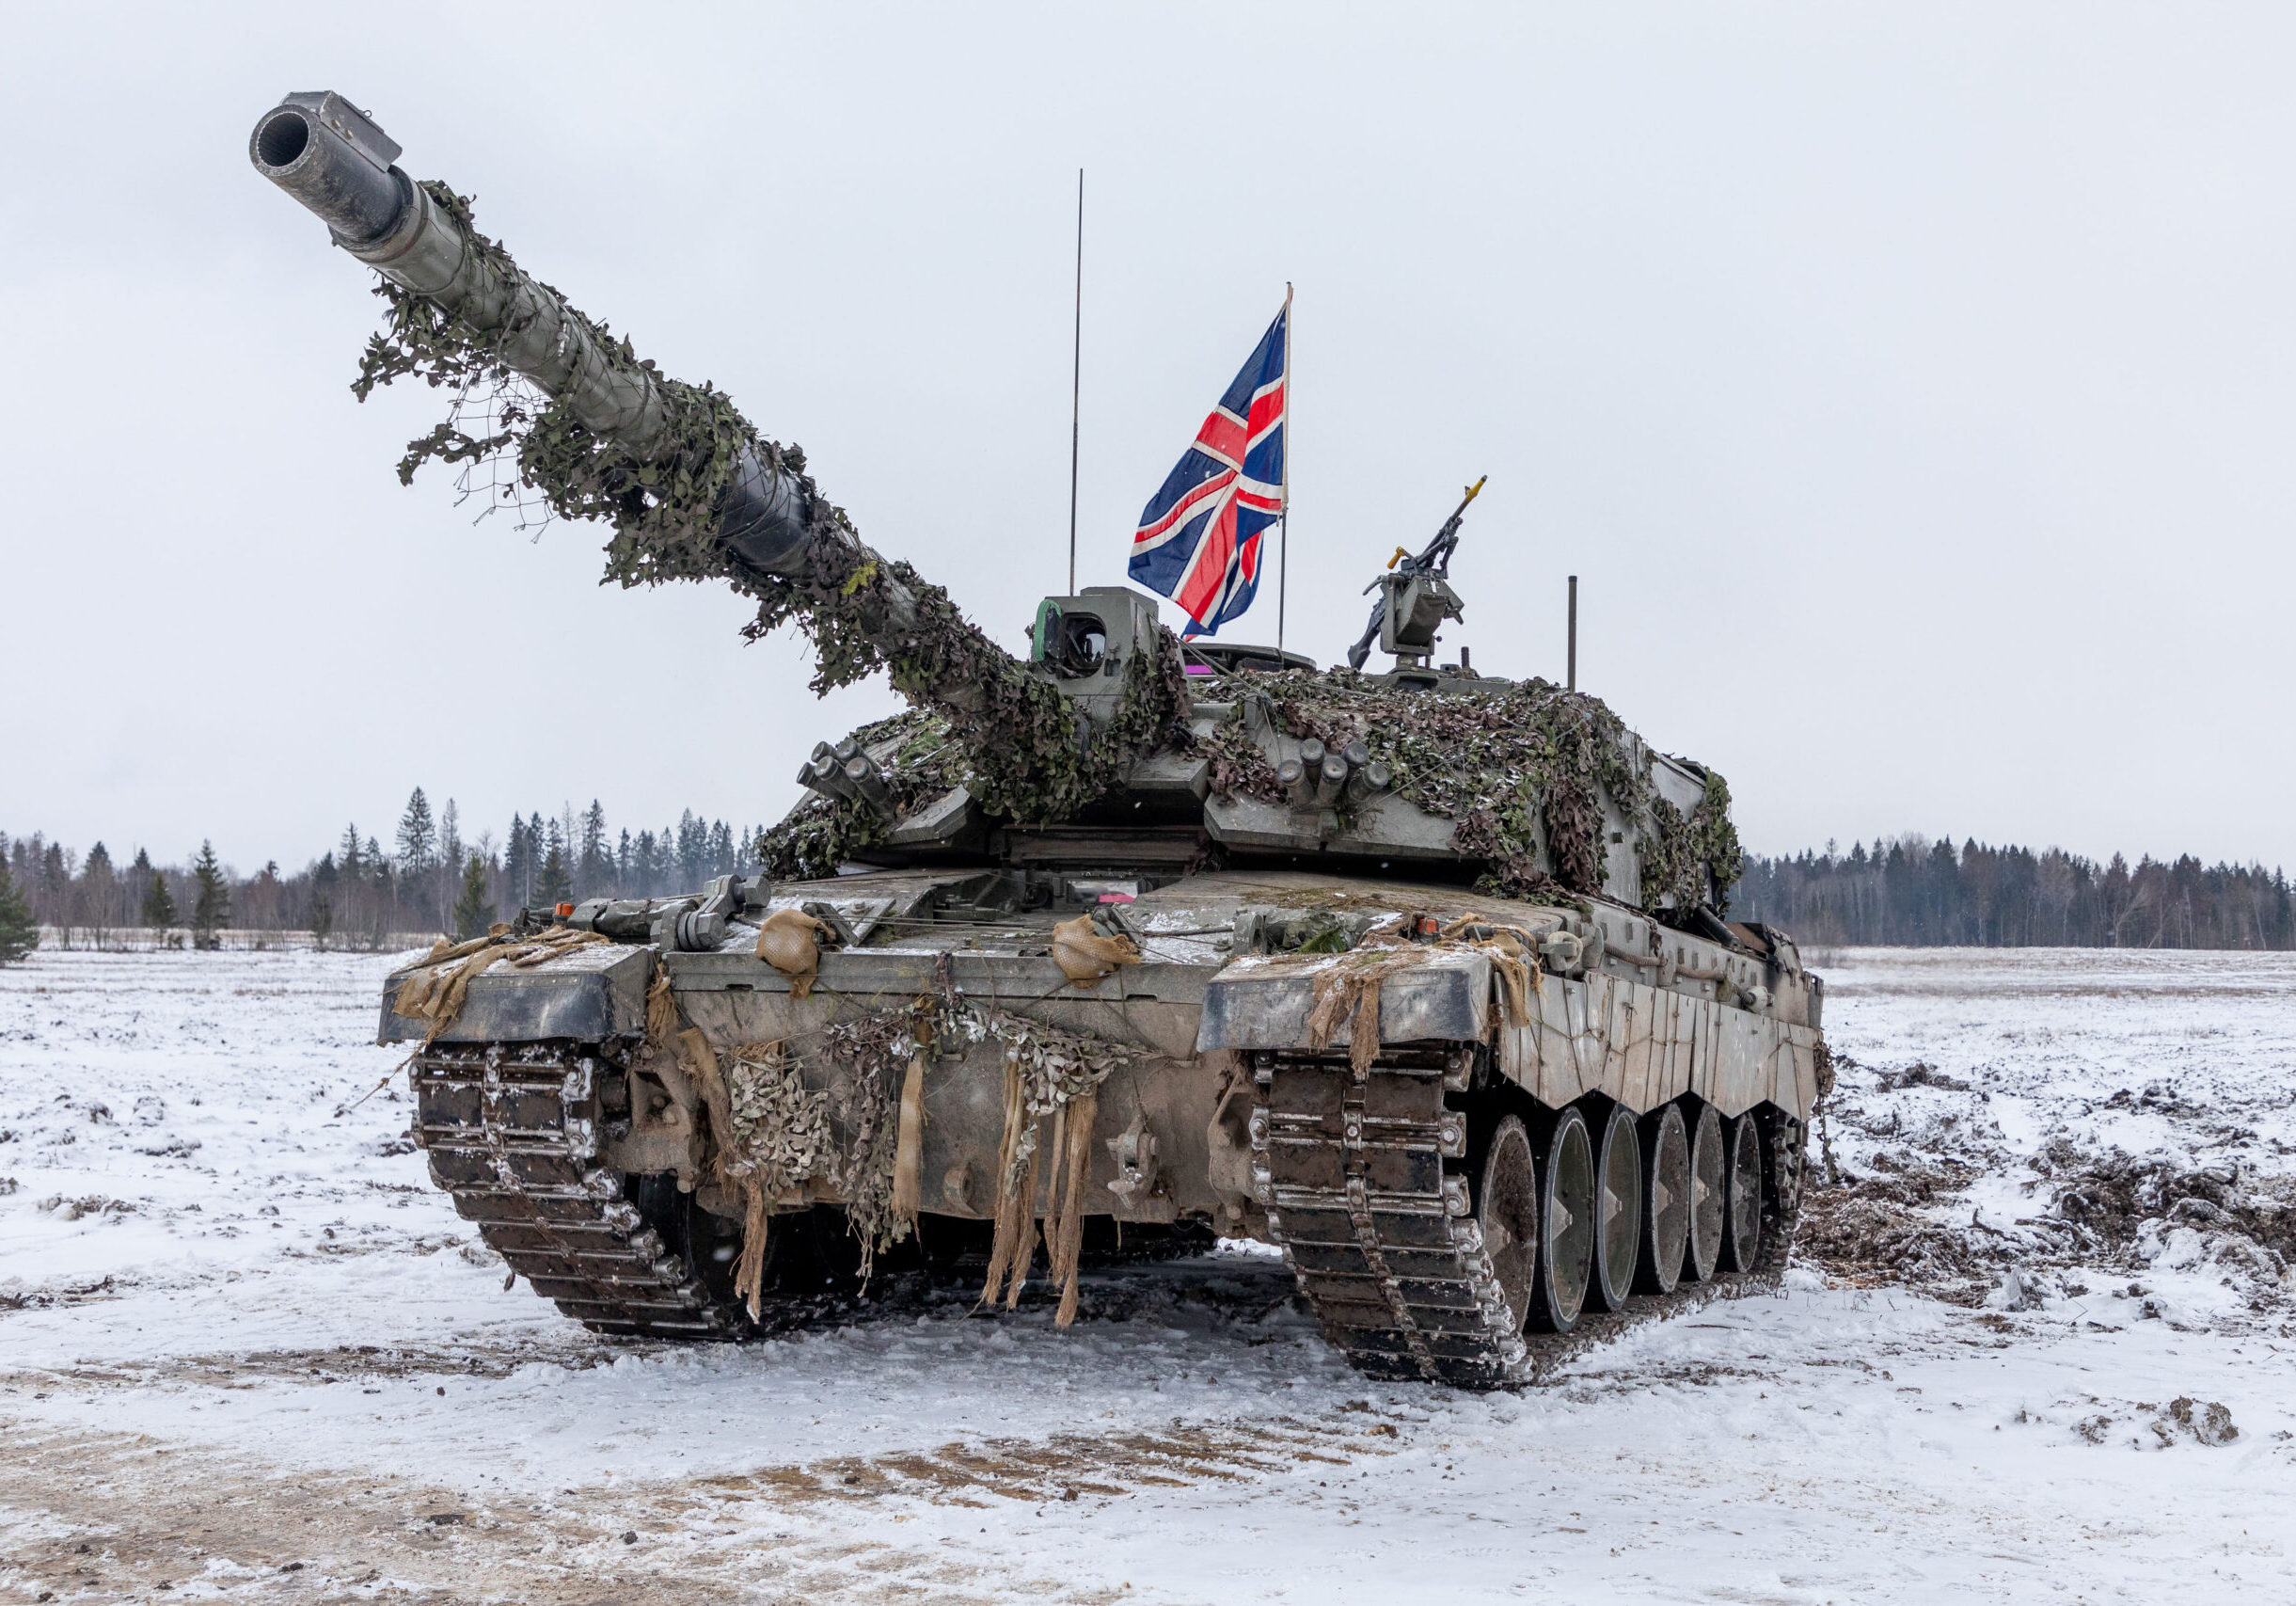 The Battlegroup forms up on the Runway, in Tapa Camp, for the start of the Brigade and Battlegroup integration phase of Exercise WINTER CAMP. This opportunity allows crews and commanders to conduct final checks before moving on to the area to establish positions.
 
Soldiers of NATOs multinational enhanced Forward Presence Battlegroup (eFP BG) are training with the 1st Estonian Infantry Brigade (1 EST Bde) during Estonias annual exercise WINTER CAMP. The two-week long exercise which started on the 28th of January 2023 demonstrates the combined arms capabilities of UK, French, Danish and Estonian forces.
 
For the past five months, the current rotation of the UK-led eFP BG has consisted of the British Armys Kings Royal Hussars (KRH) Tank Regiment, B Company of the Scots Guards, 127 Battery and 176 Battery of the Royal Artillery and 3 Armoured Engineer Squadron (3AES) deployed alongside the Armys Viking Squadron and the Les Verts Company of the French Armys Mountain Infantry Brigade.
 
The exercise also saw a further surge of troops including a company of Mountain Commandos and a platoon of Chemical Biological Radioactive and Nuclear (CBRN) specialists of the French Army DeTere, the RAFs Chinook Helicopters (CH47) of the Royal Air Forces Aviation Task Force and High Mobility Artillery Rocket System (HIMARS) of the US Armys 1st Infantry Division (1ID).